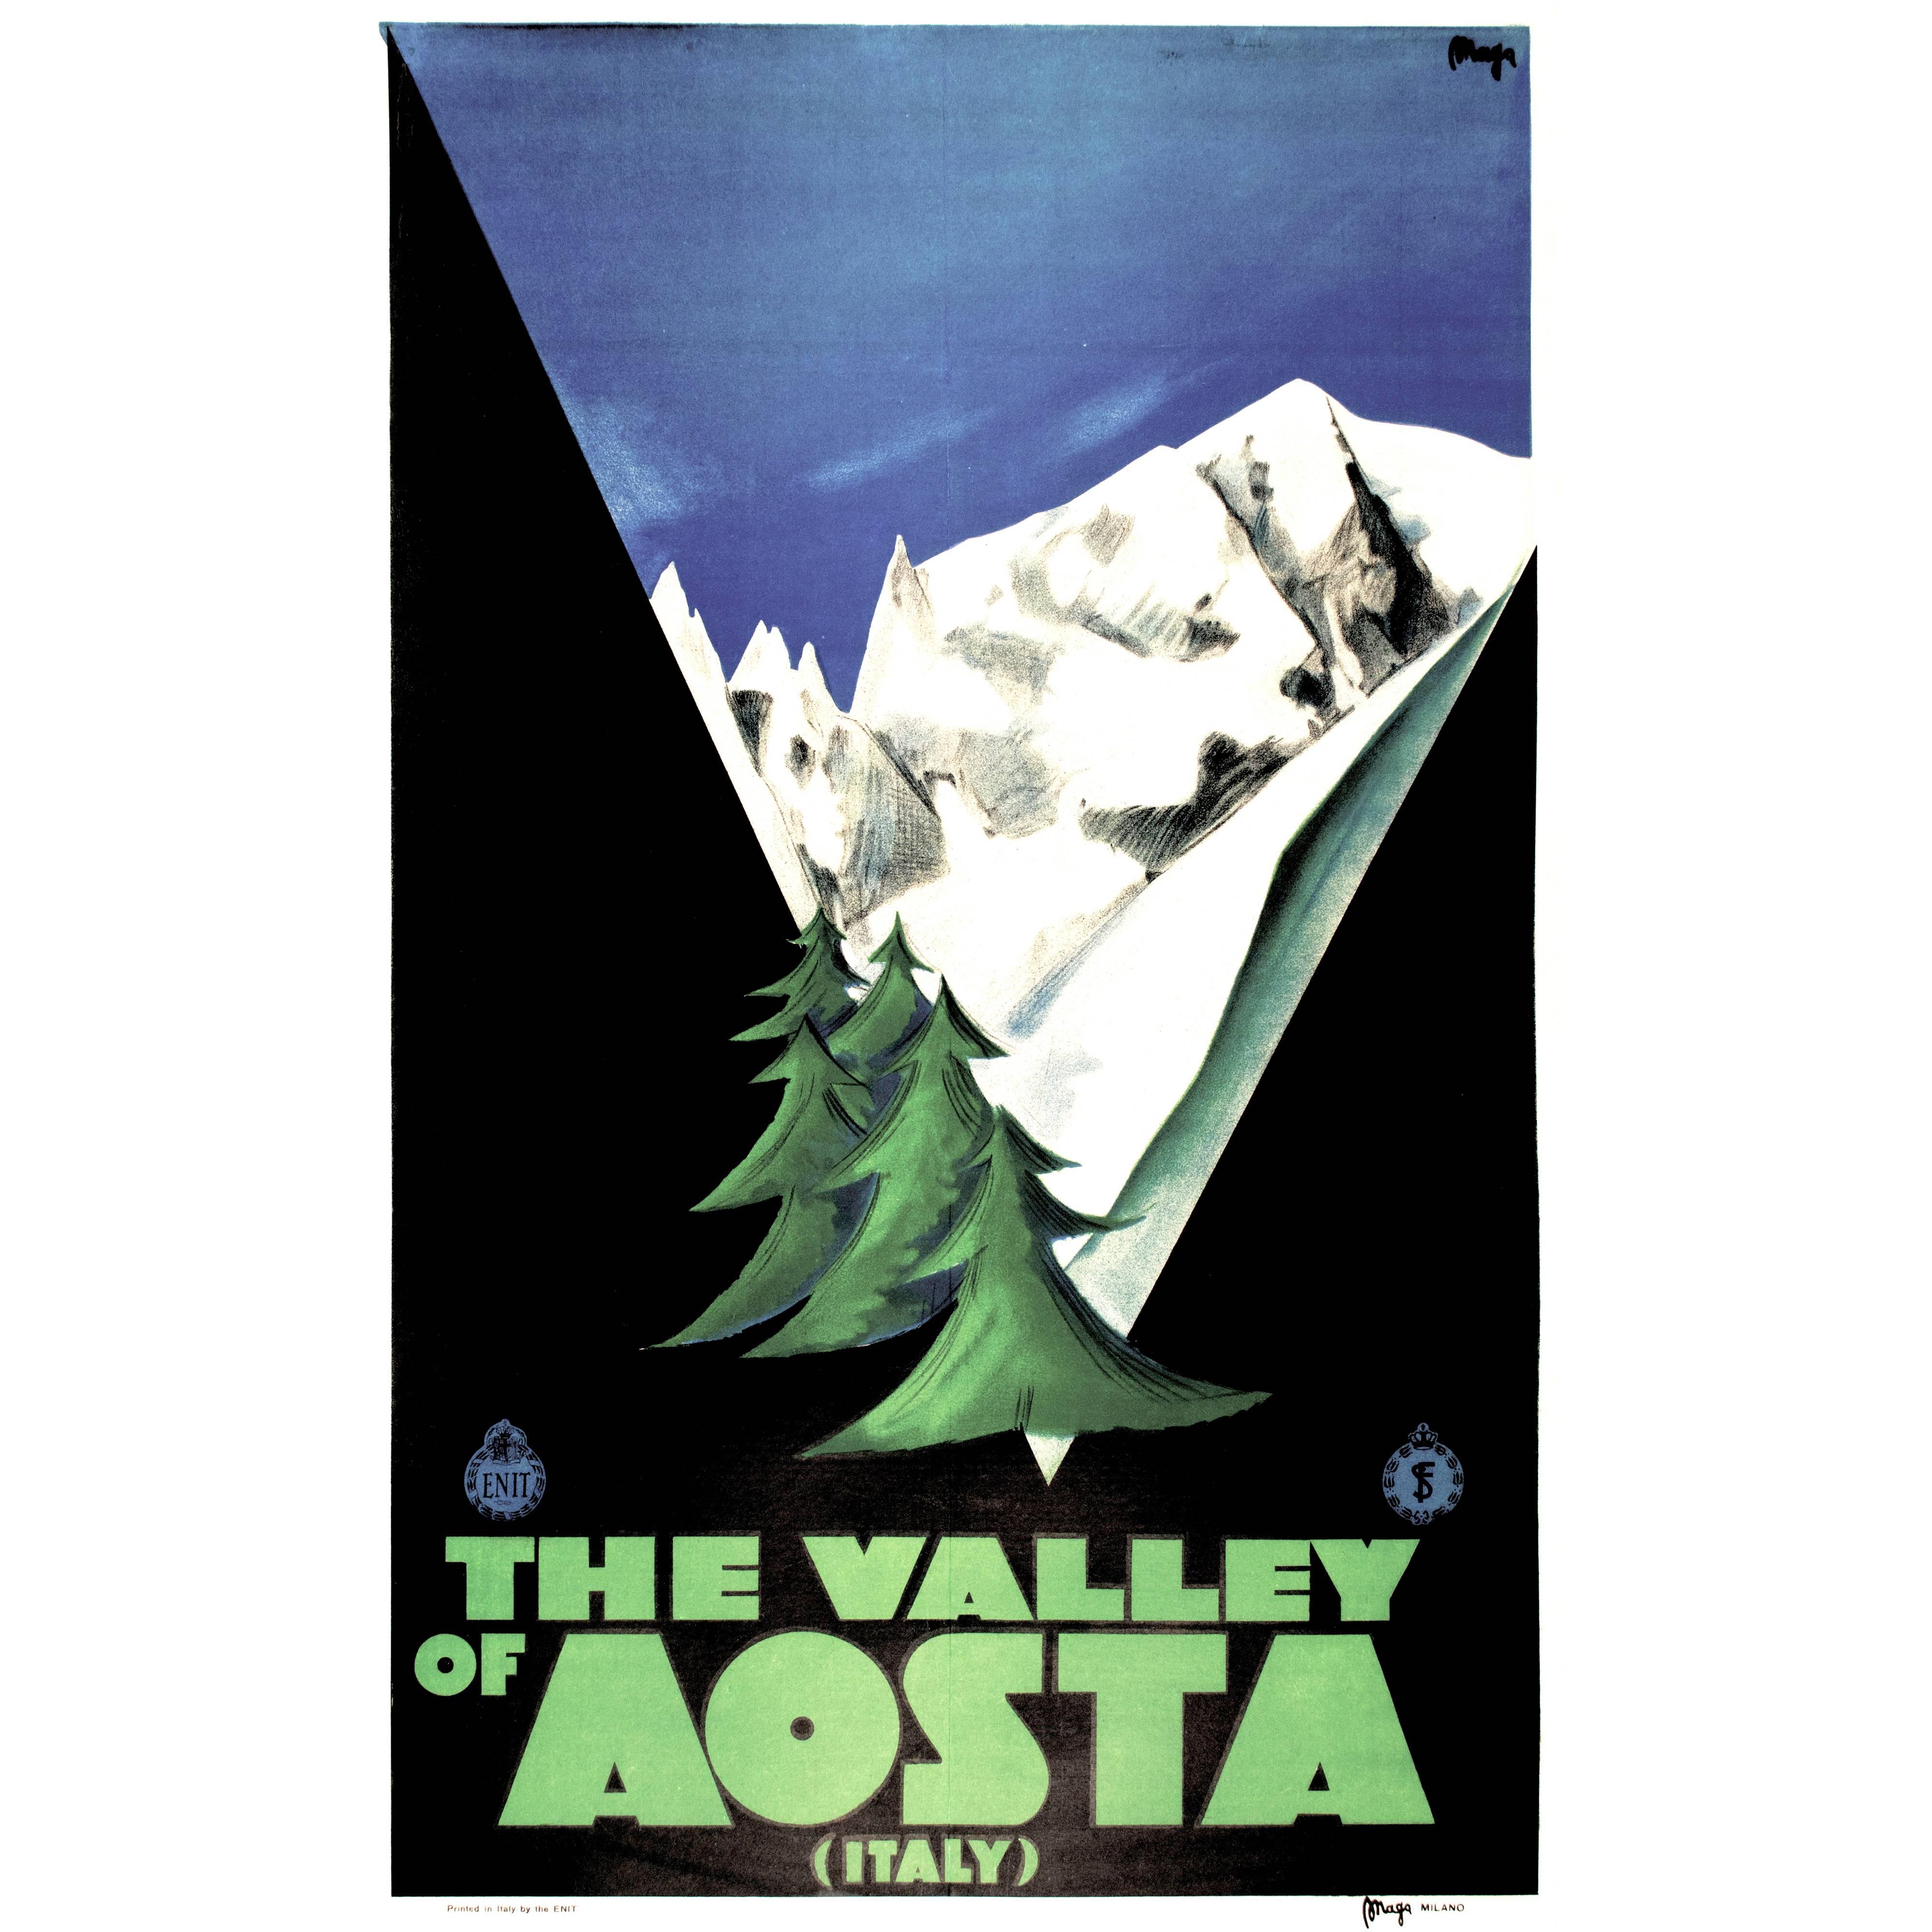 Italian Art Deco Travel Poster by Maga for the Valley of Aosta ski area